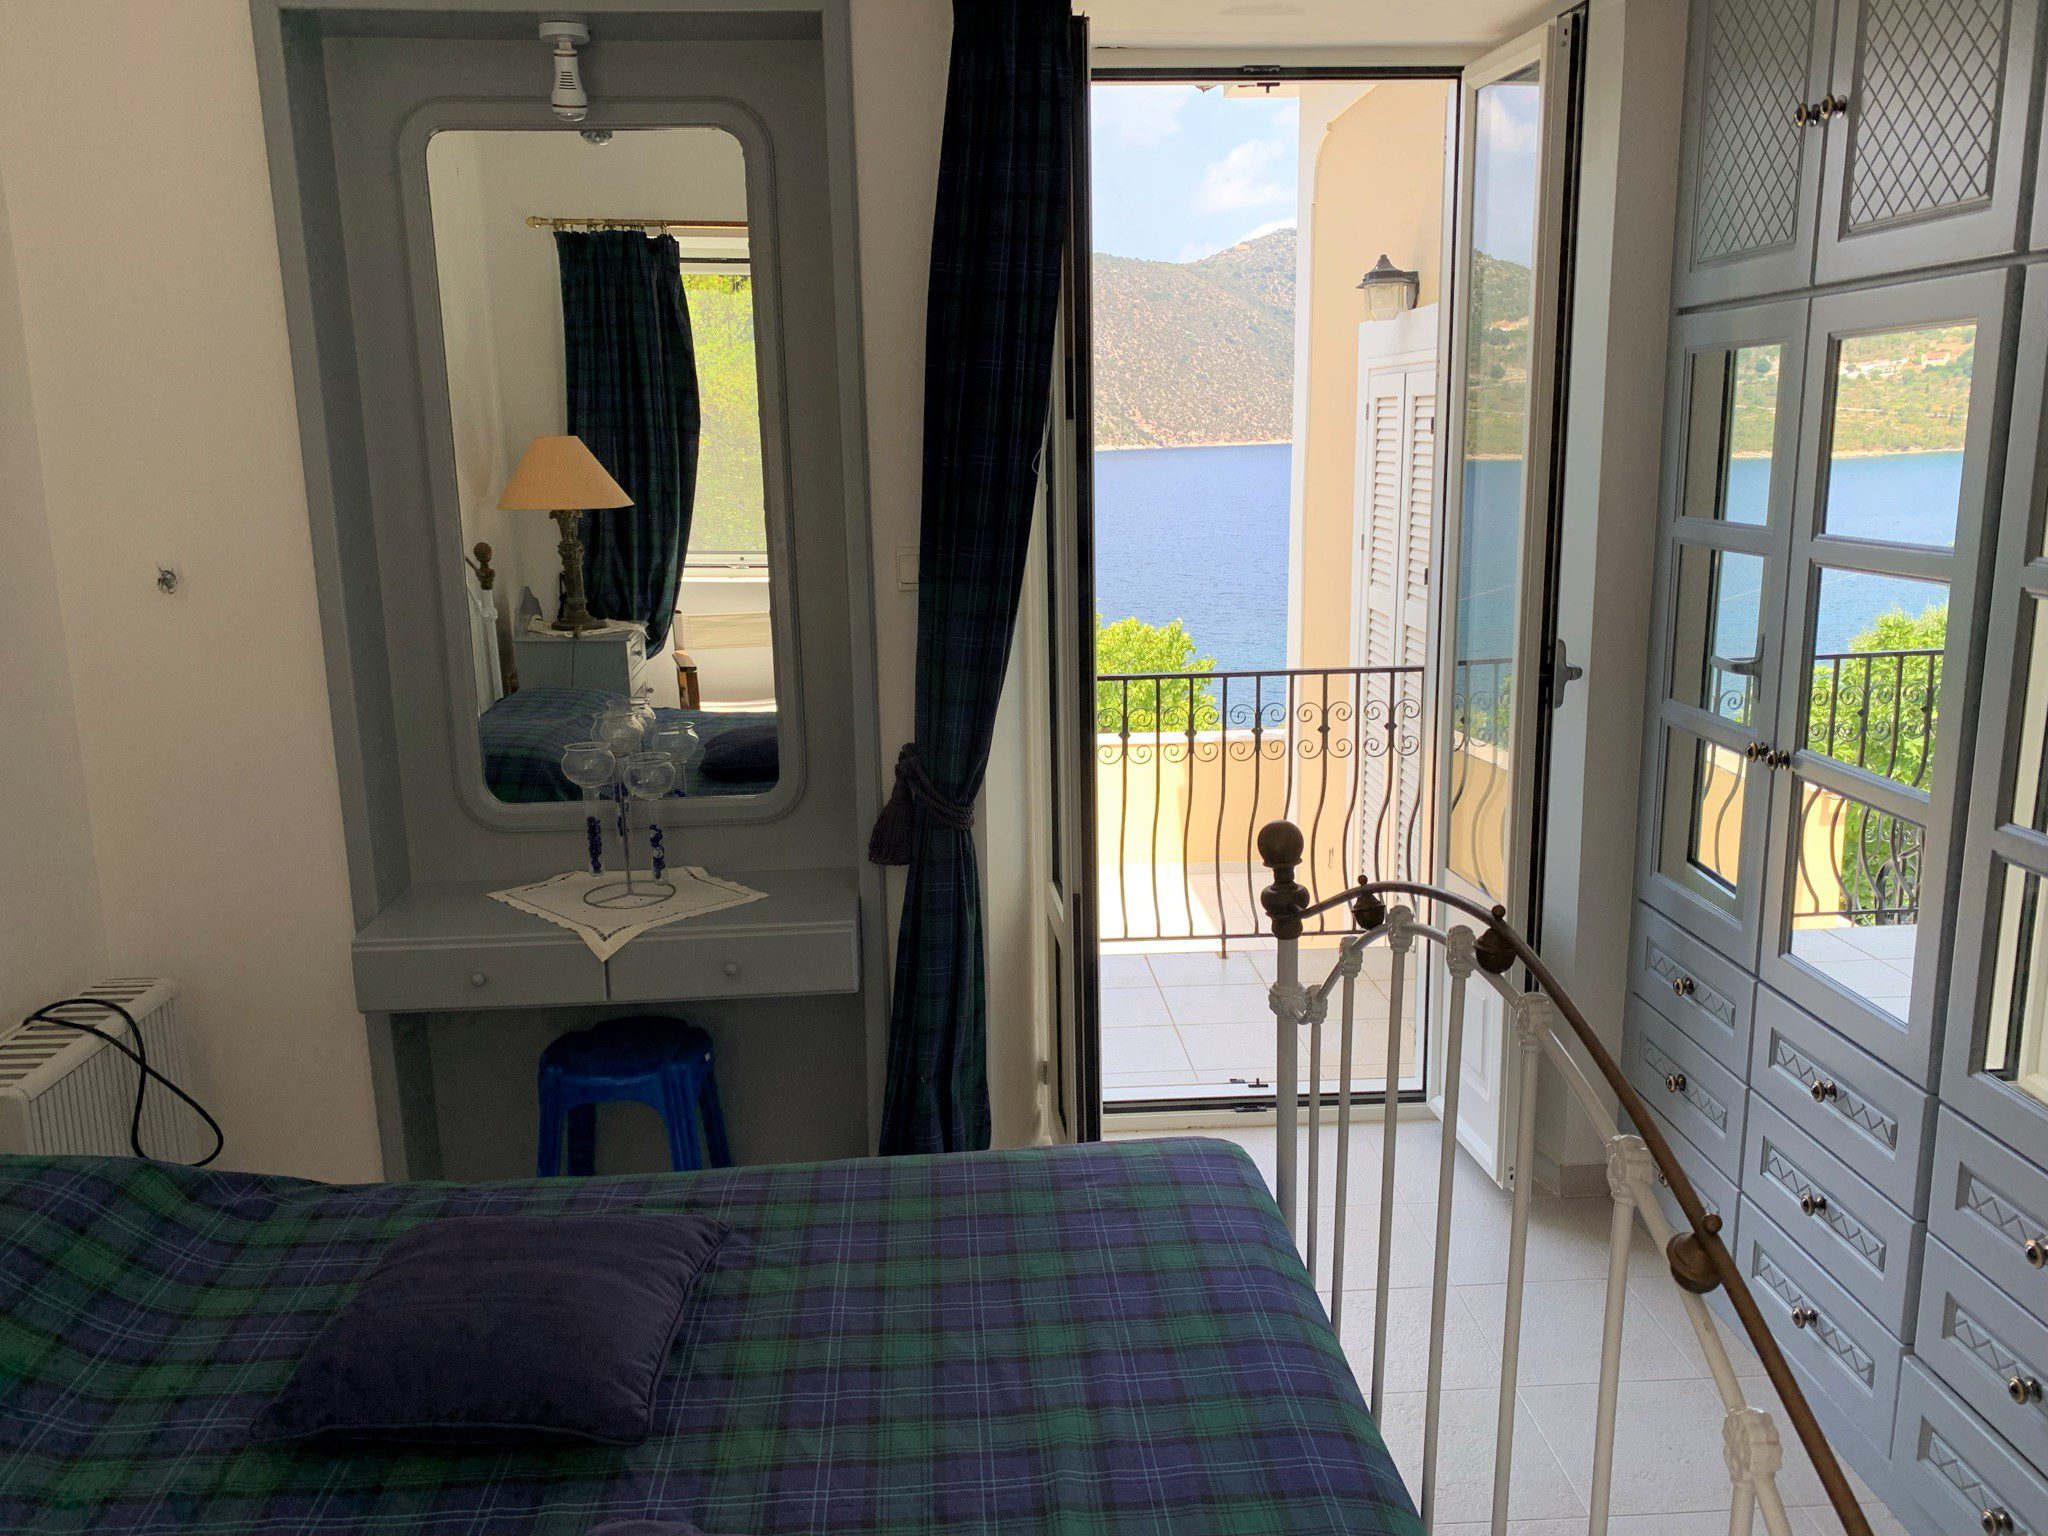 Bedroom of house for sale Ithaca Greece, Aetos